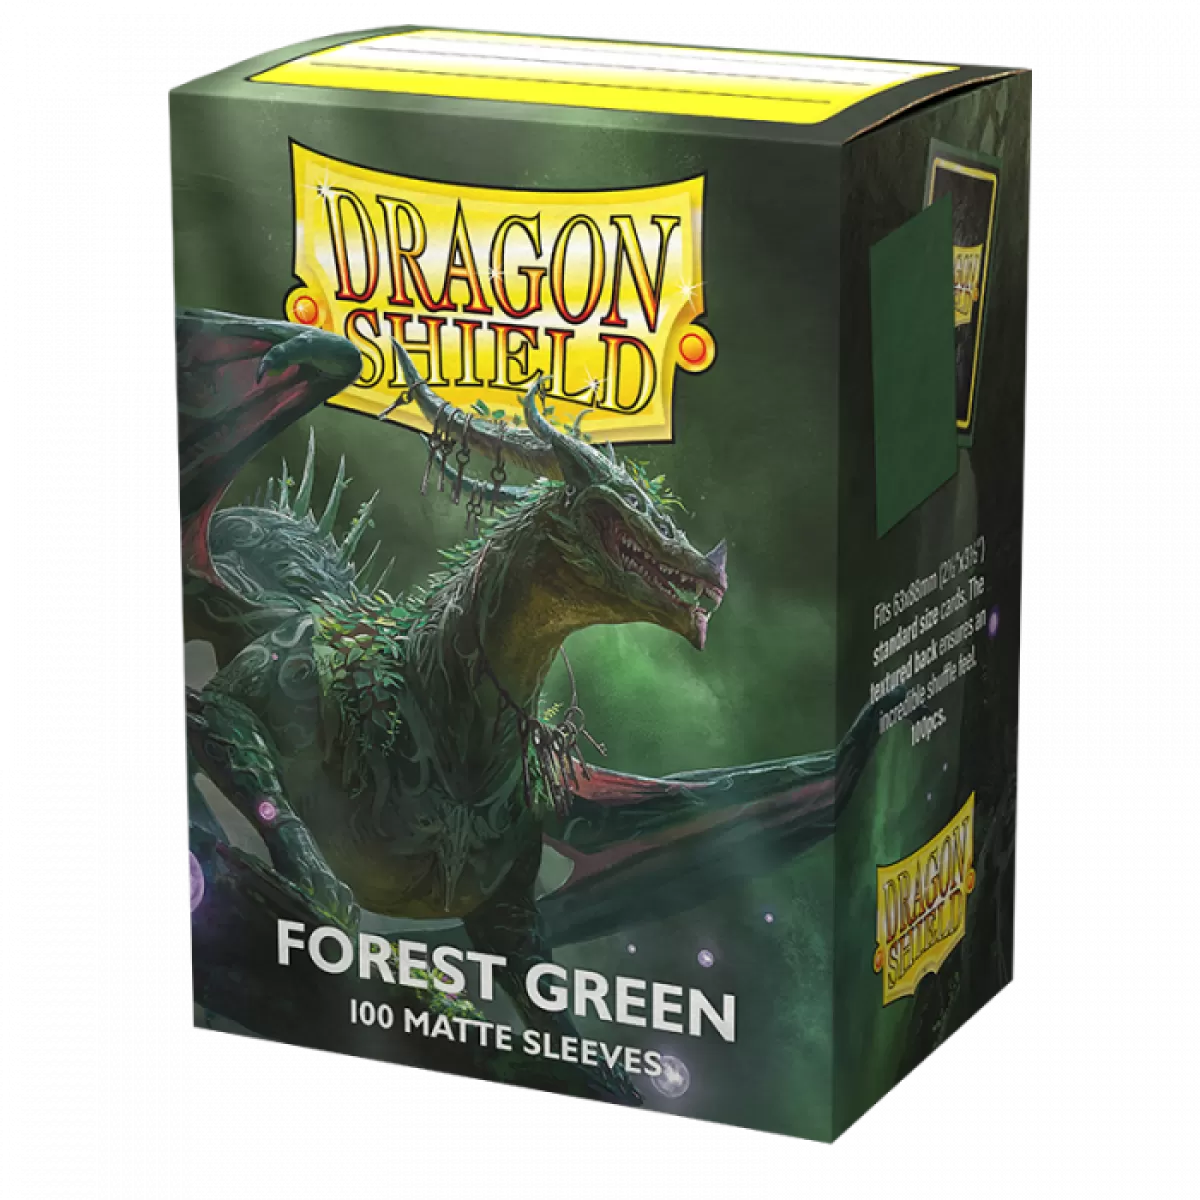 Sleeves - Dragon Shield - Box 100 - Forest Green MATTE [::] Let's